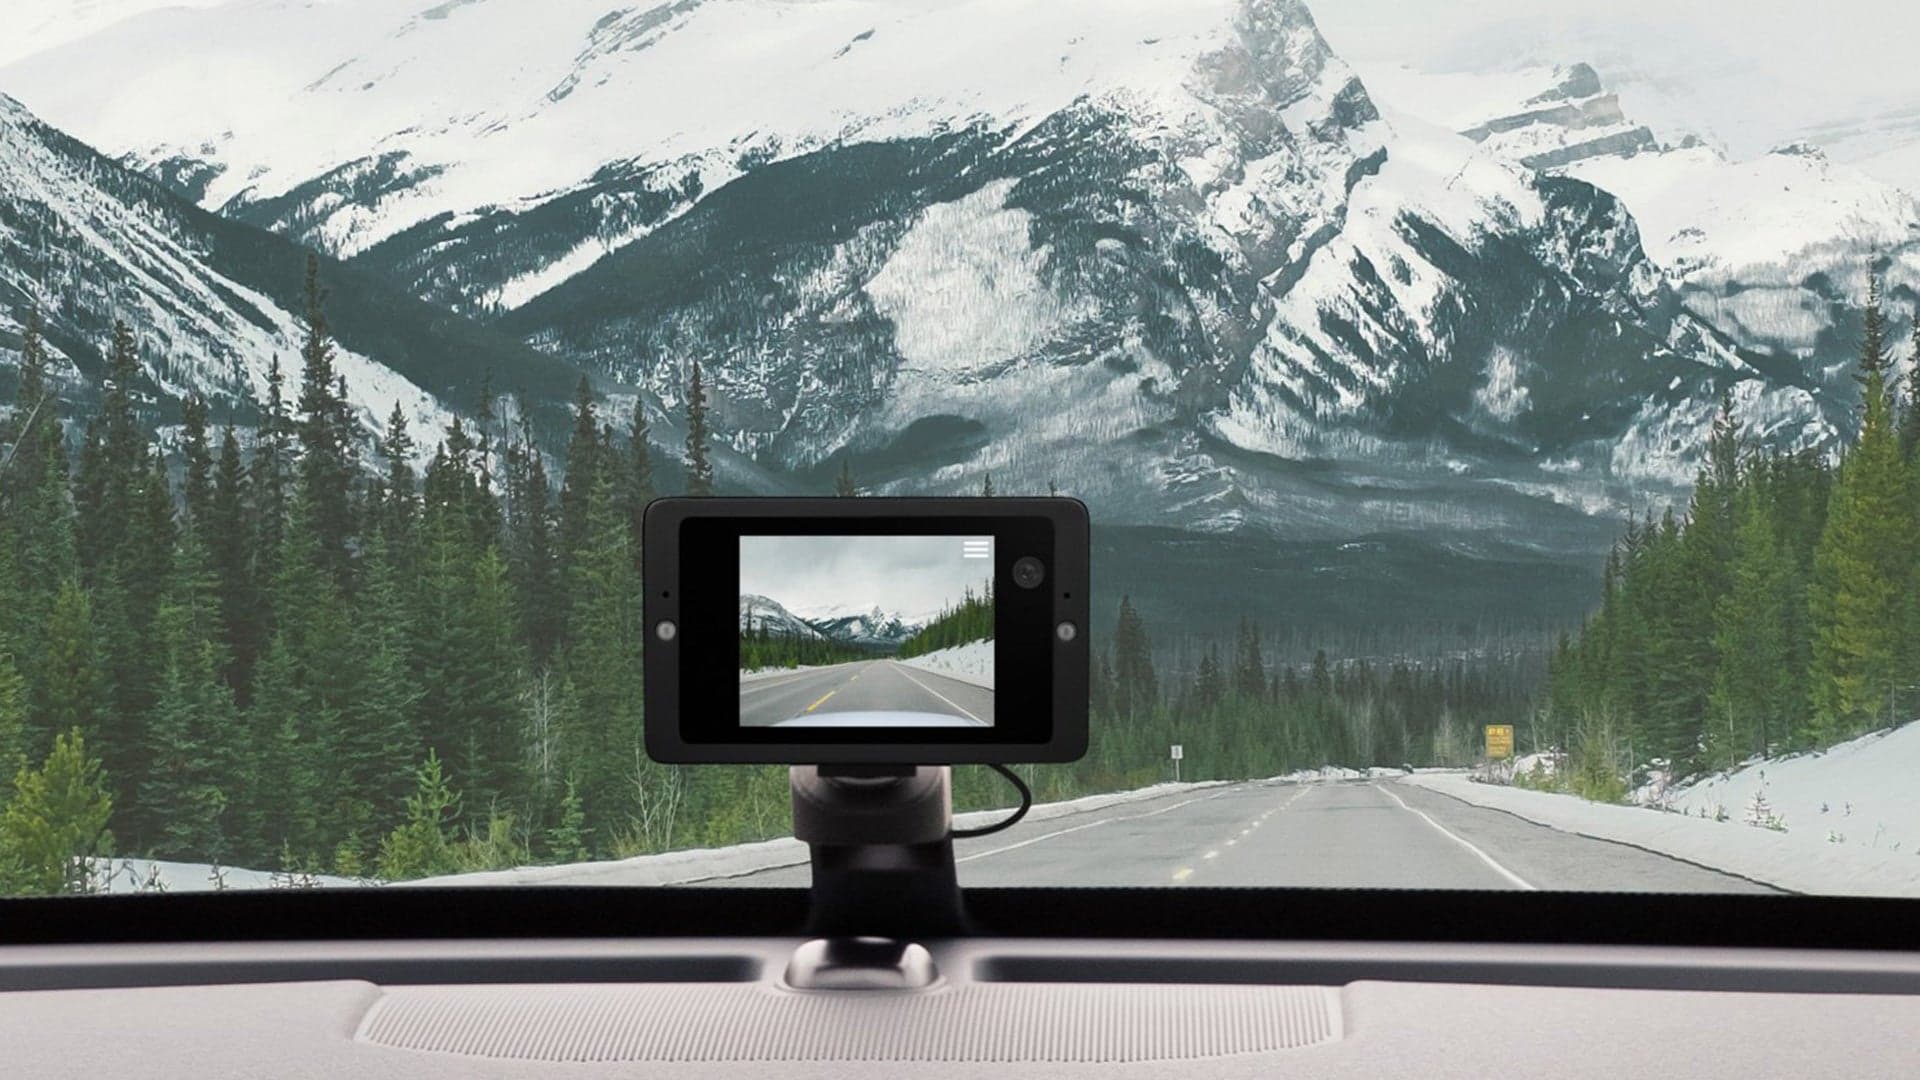 Owl Car Cam Review: The Dash Cam to Choose If You Give a Hoot About Filming Your Drive